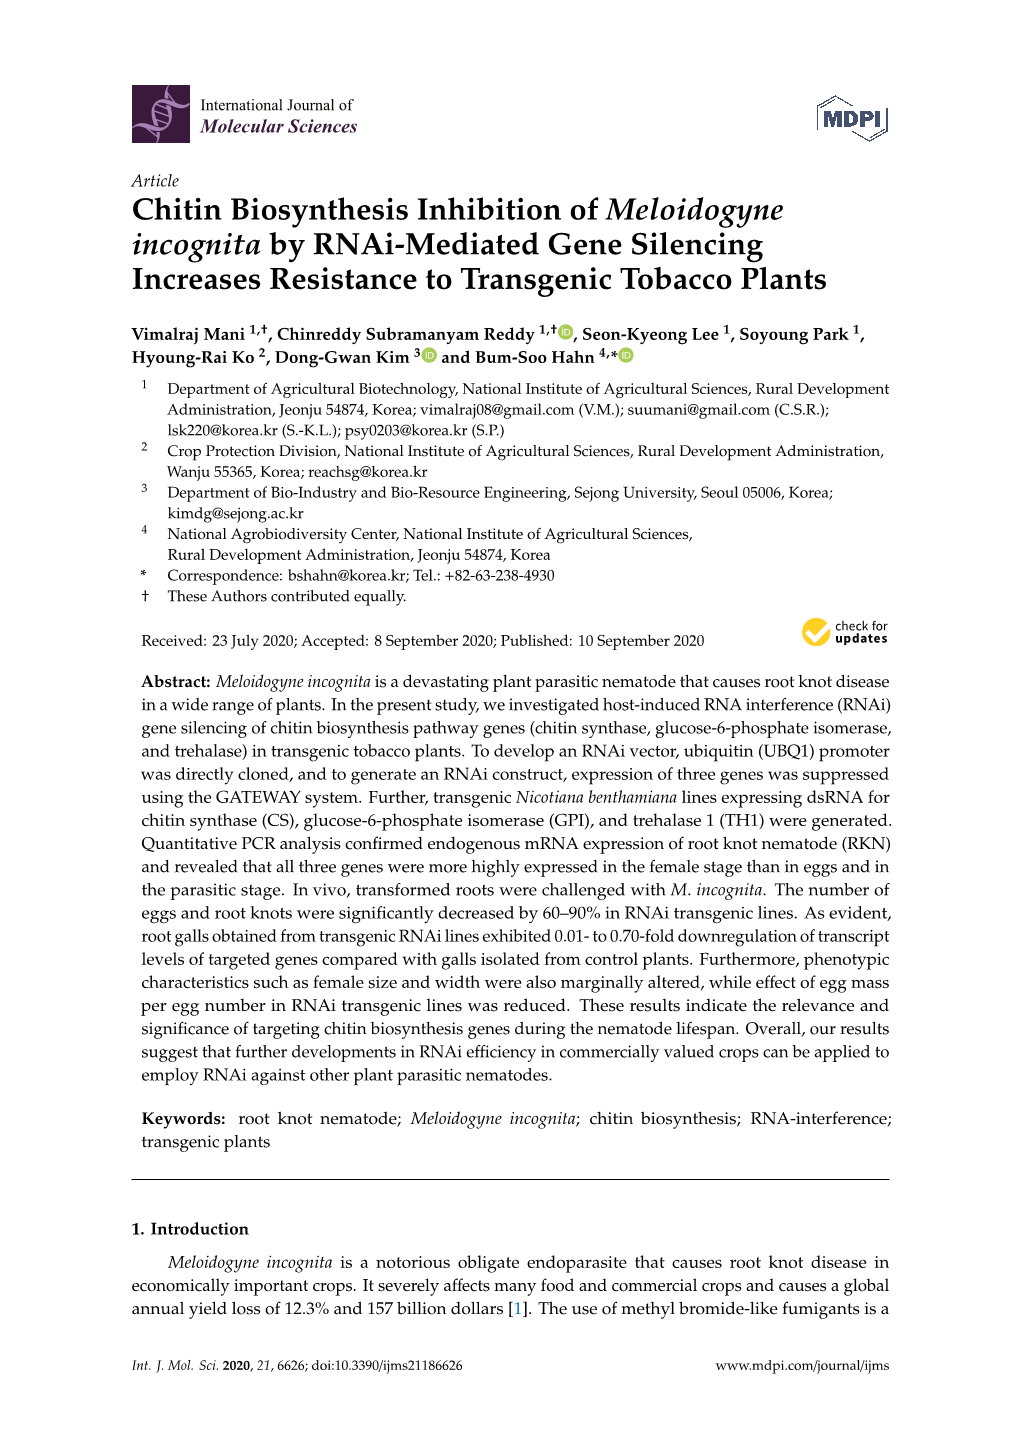 Chitin Biosynthesis Inhibition of Meloidogyne Incognita by Rnai-Mediated Gene Silencing Increases Resistance to Transgenic Tobacco Plants